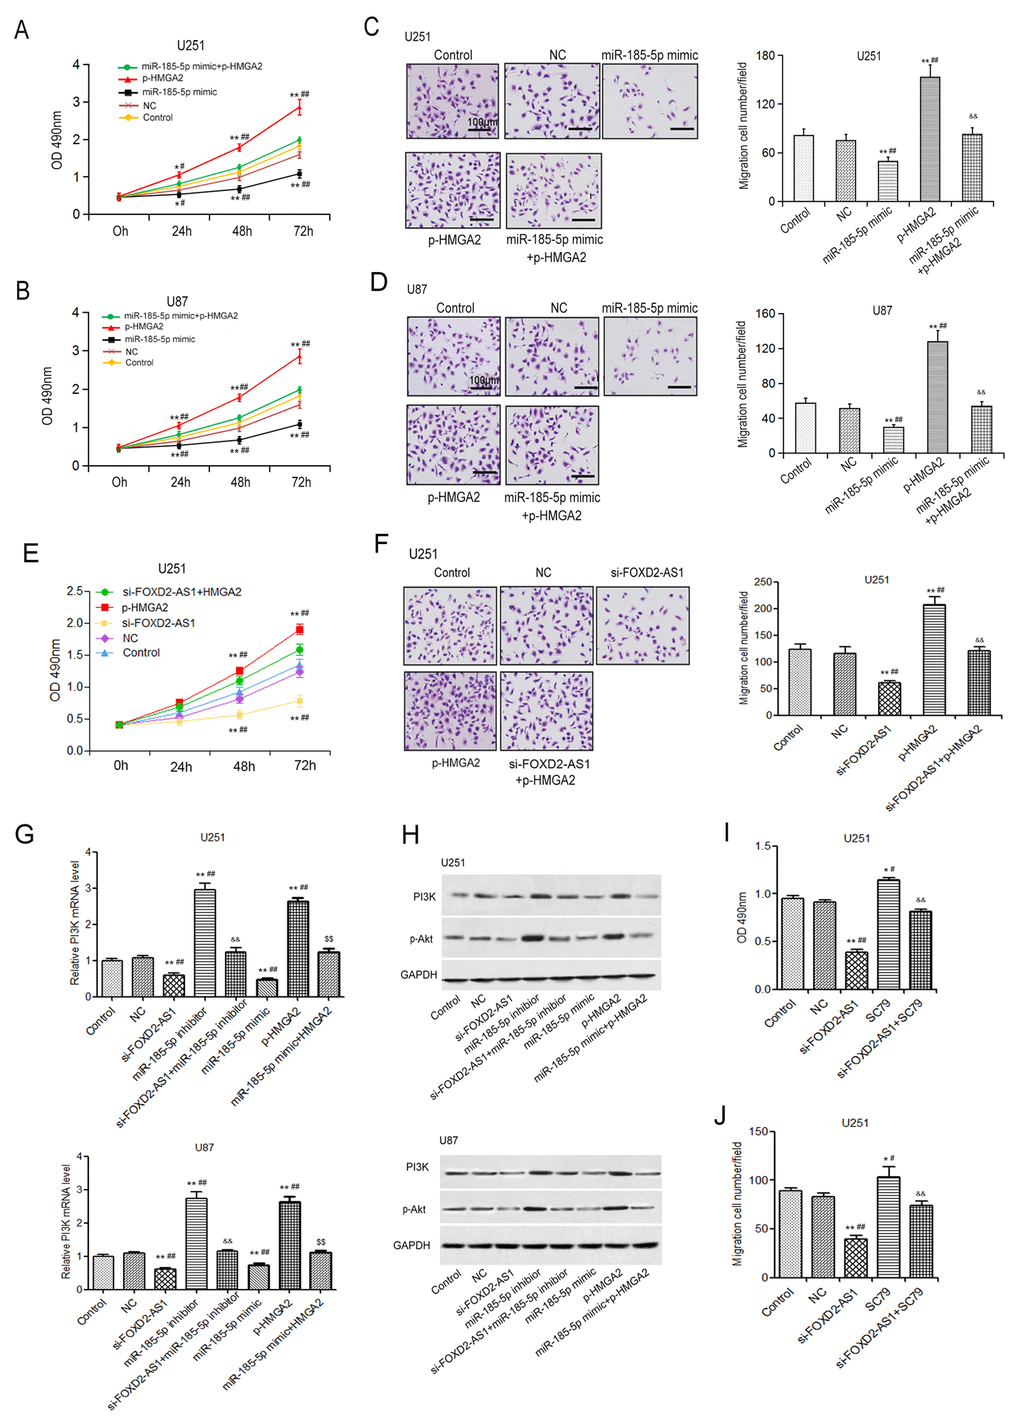 FOXD2-AS1 regulates the proliferation and migration of glioma cells by miR-185-5p/HMGA2-mediated AKT signaling. (A, B) The influence of miR-185-5p/HMGA2 axis on the proliferation of U251 and U87 cells was analyzed by MTT. (C,D) The effect of miR-185-5p/HMGA2 axis on the migration ability of U251 and U87 cells was analyzed by Transwell migration assay (200×). (E, F) Overexpression of HMGA2 abolished the inhibitory effects of FOXD2-AS1 on cell growth and migration in U251 cells as determined by MTT and migration assay. (G) Effects of the FOXD2-AS1/miR-185-5p/HMGA2 on the mRNA level of PI3K. (H) Effects of the FOXD2-AS1/miR-185-5p/HMGA2 on the levels of PI3K and phospho-Akt (p-AKT) in U251 and U87 cells were examined by Western blot. (I, J) Treatment of SC79 blocked the suppressive effects of FOXD2-AS1 on cell growth and migration in U251 cells. MTT assay and transwell assay were performed with transfected cells that treated with SC79 (5 µg/ml) for 48 h (I) and 24 h (J), respectively. **p ##p &&p 